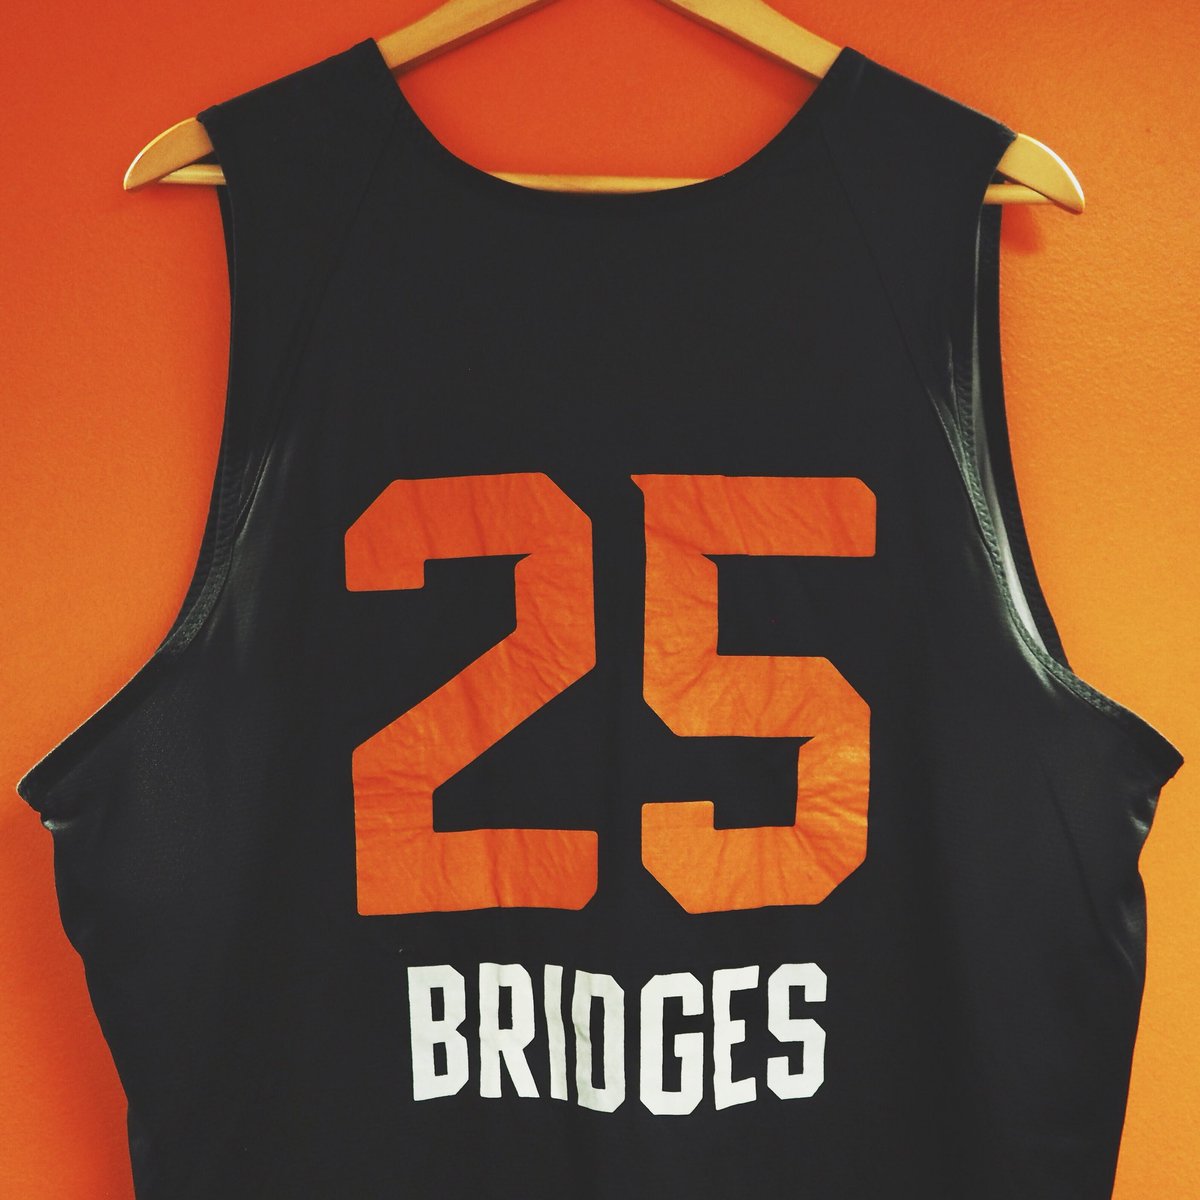 GIVEAWAY TIME!  RT this for a chance to win a used Mikal Bridges practice jersey! https://t.co/6d5PG8z43t